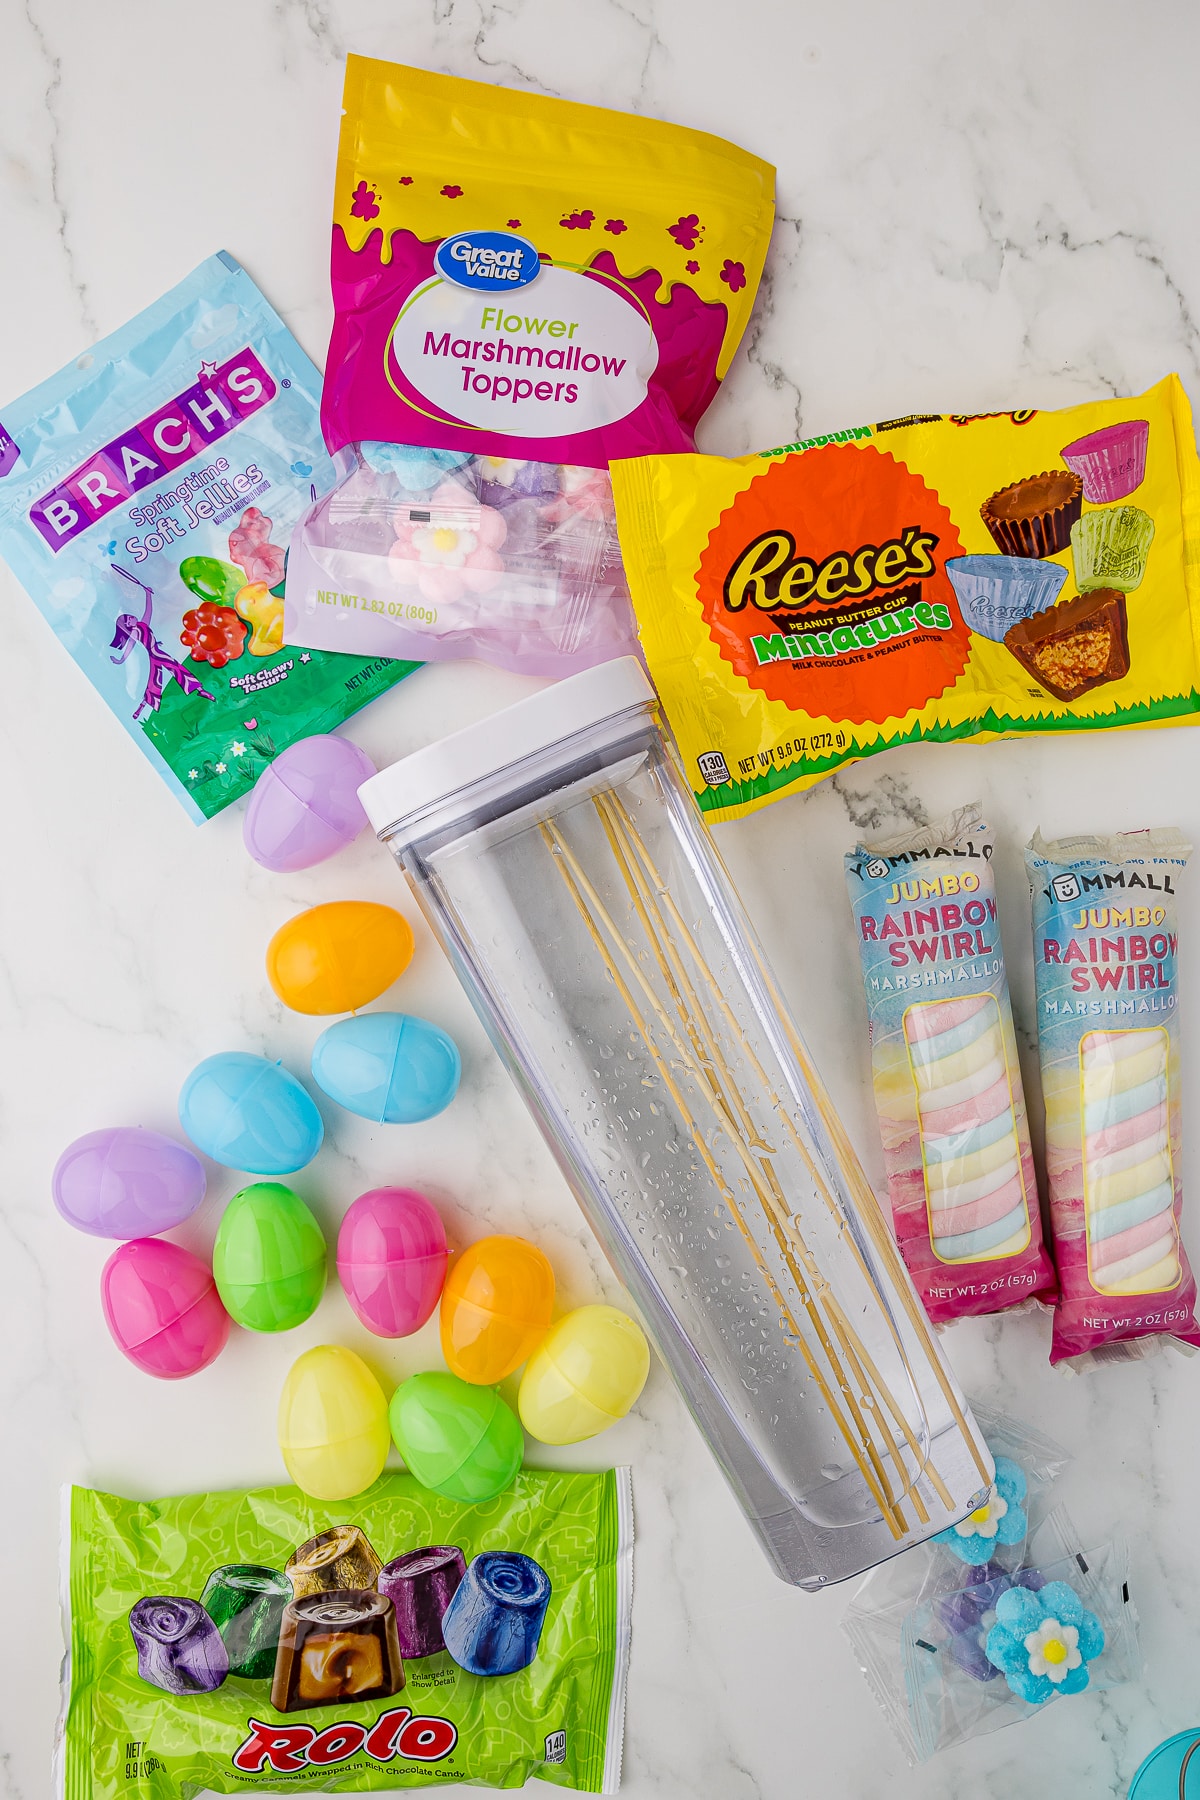 ingredients for easter candy kabobs, including great value flower marshmallow toppers, reese's miniature peanut butter cups, yummall jumbo rainbow swirl marshmallows, bamboo skewers in water, fillable plastic easter eggs, and easter rolos